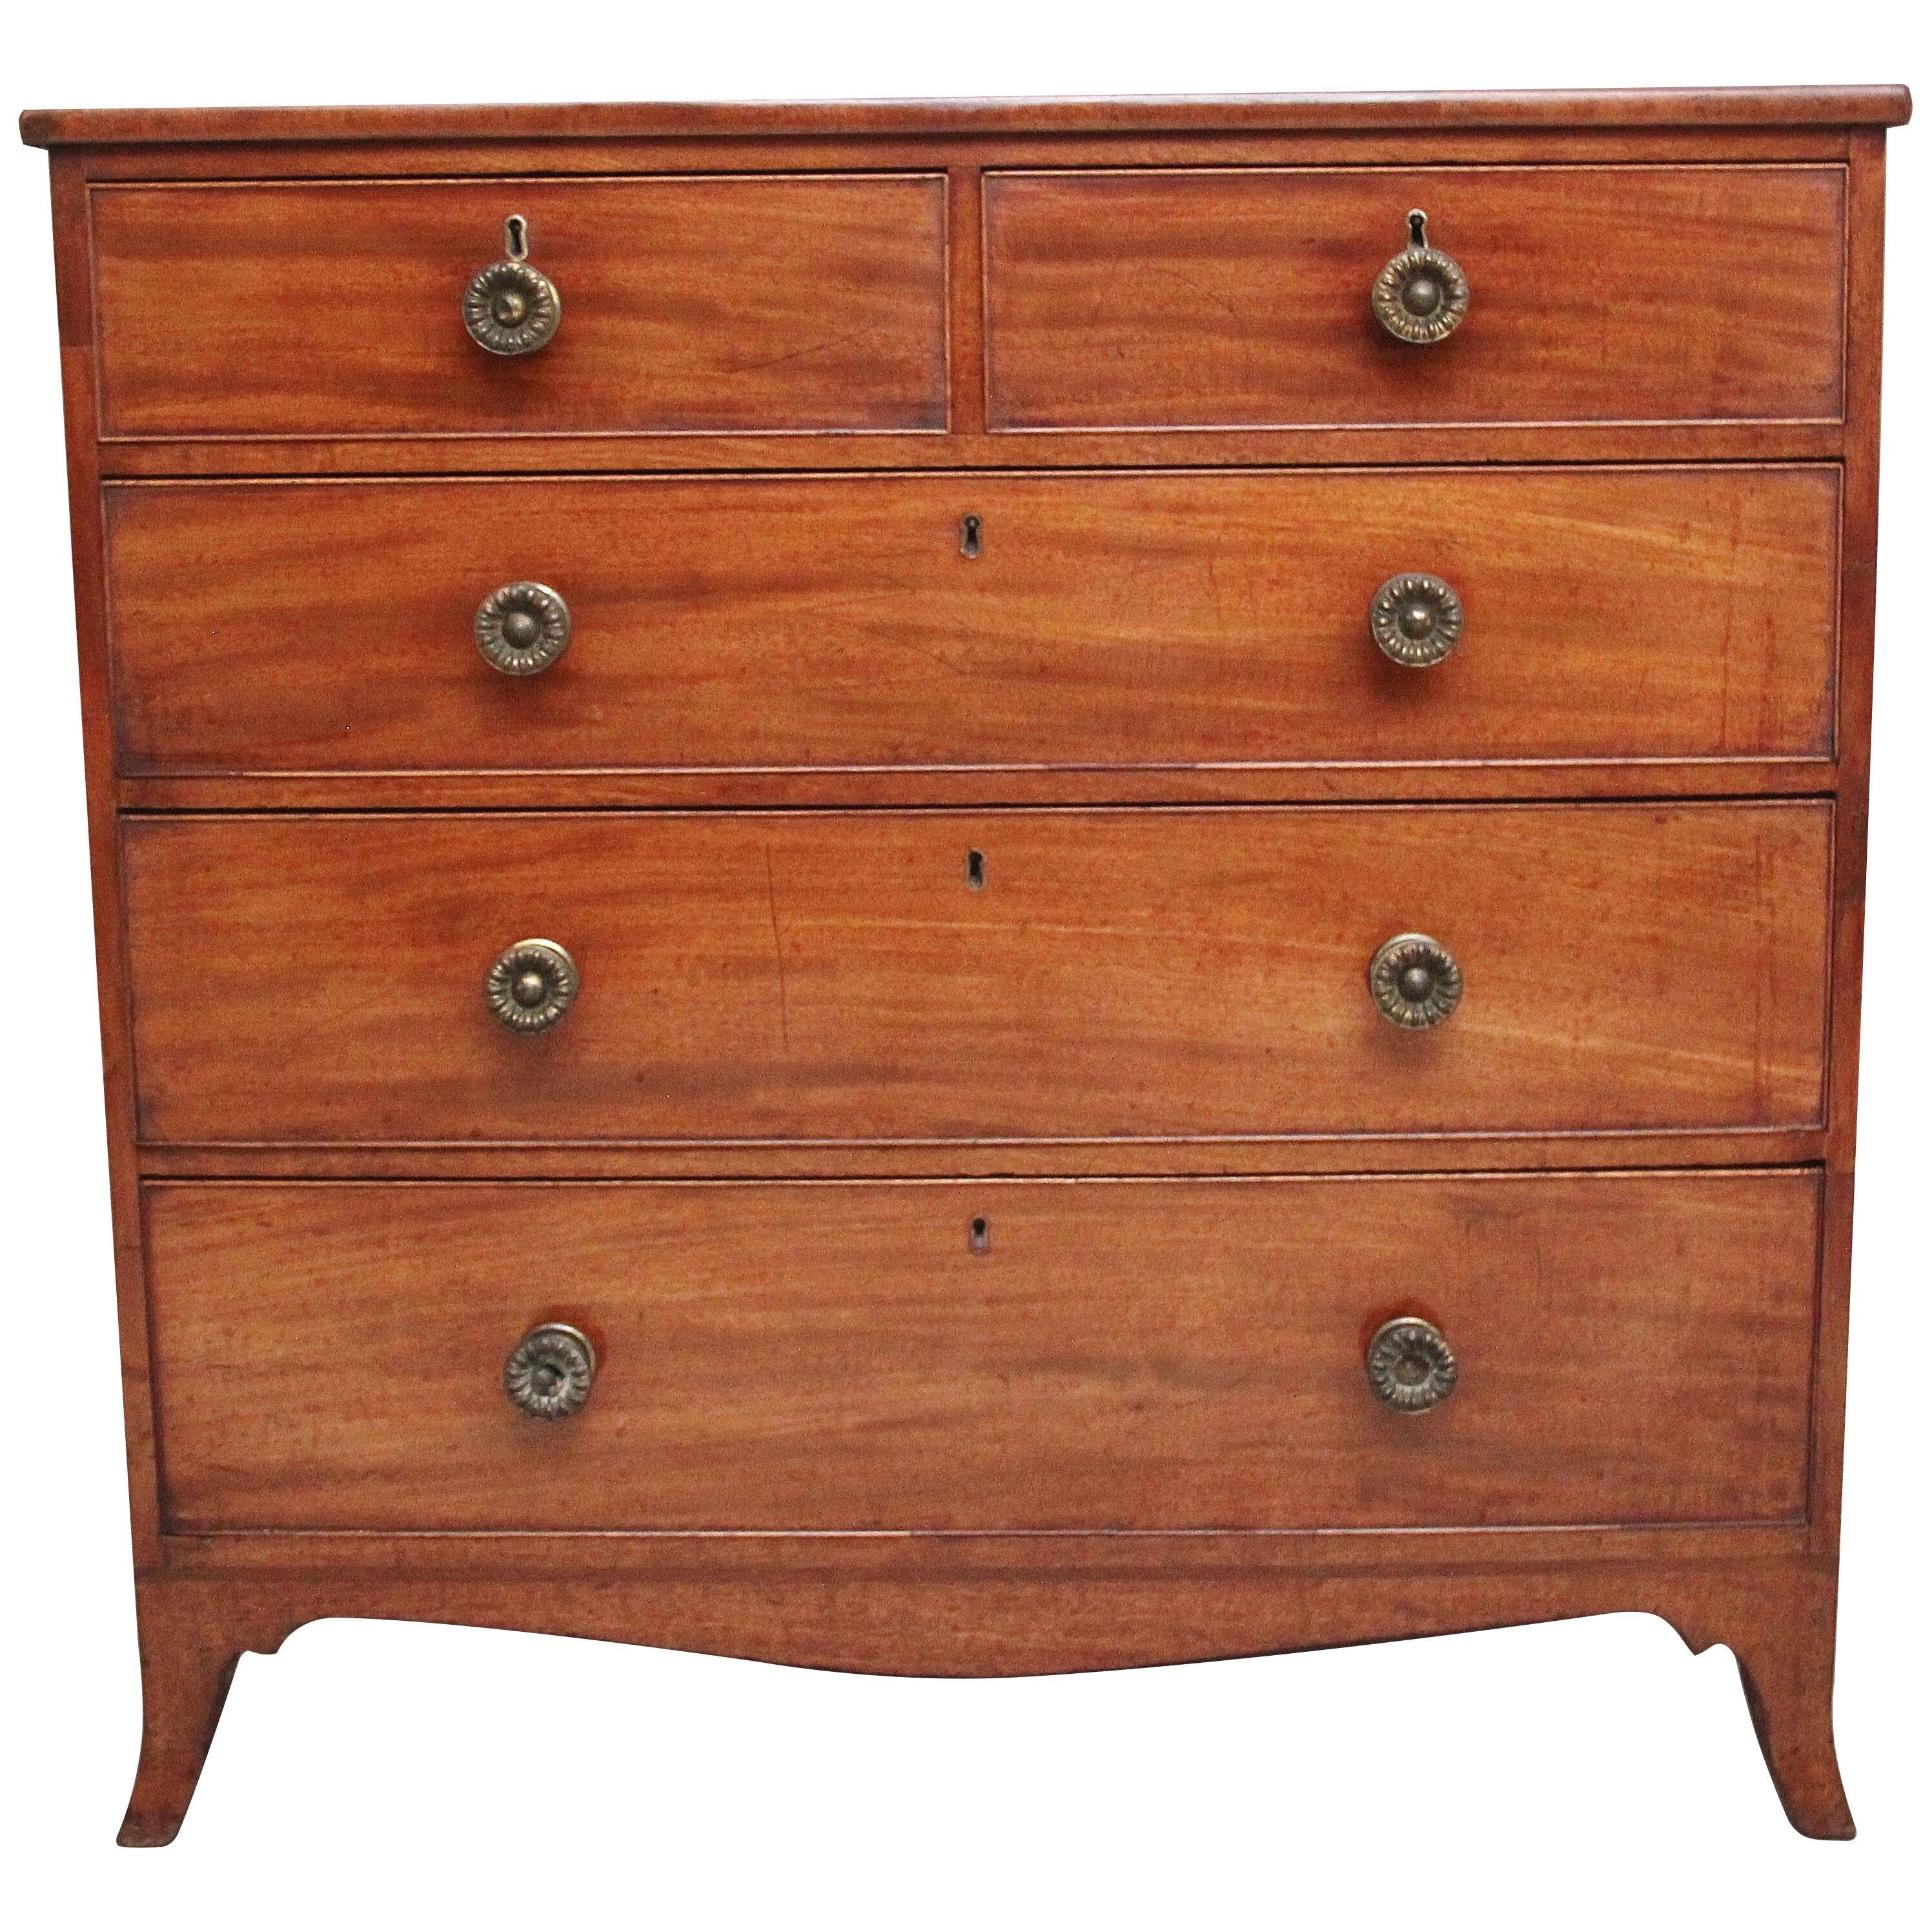 Early 19th Century mahogany chest of drawers